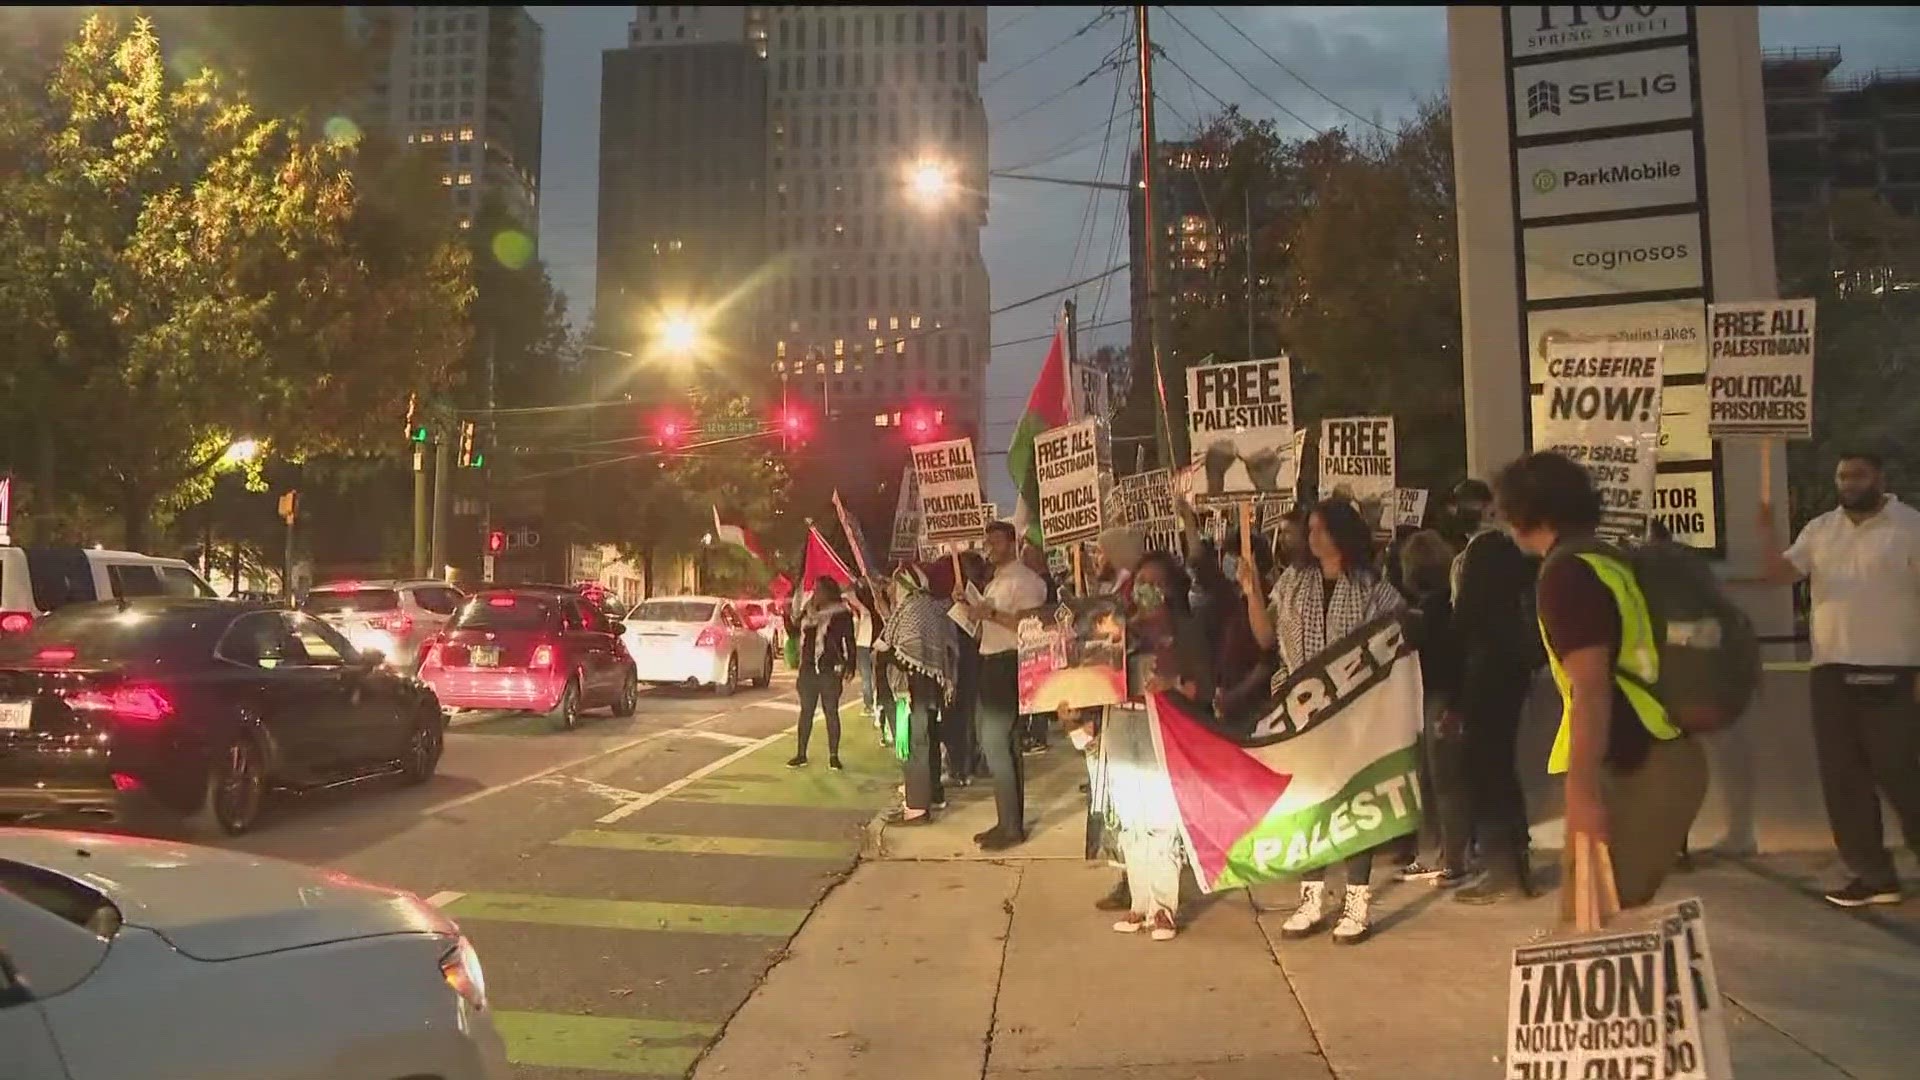 People near and far are calling for the Israel-Hamas conflict to end.